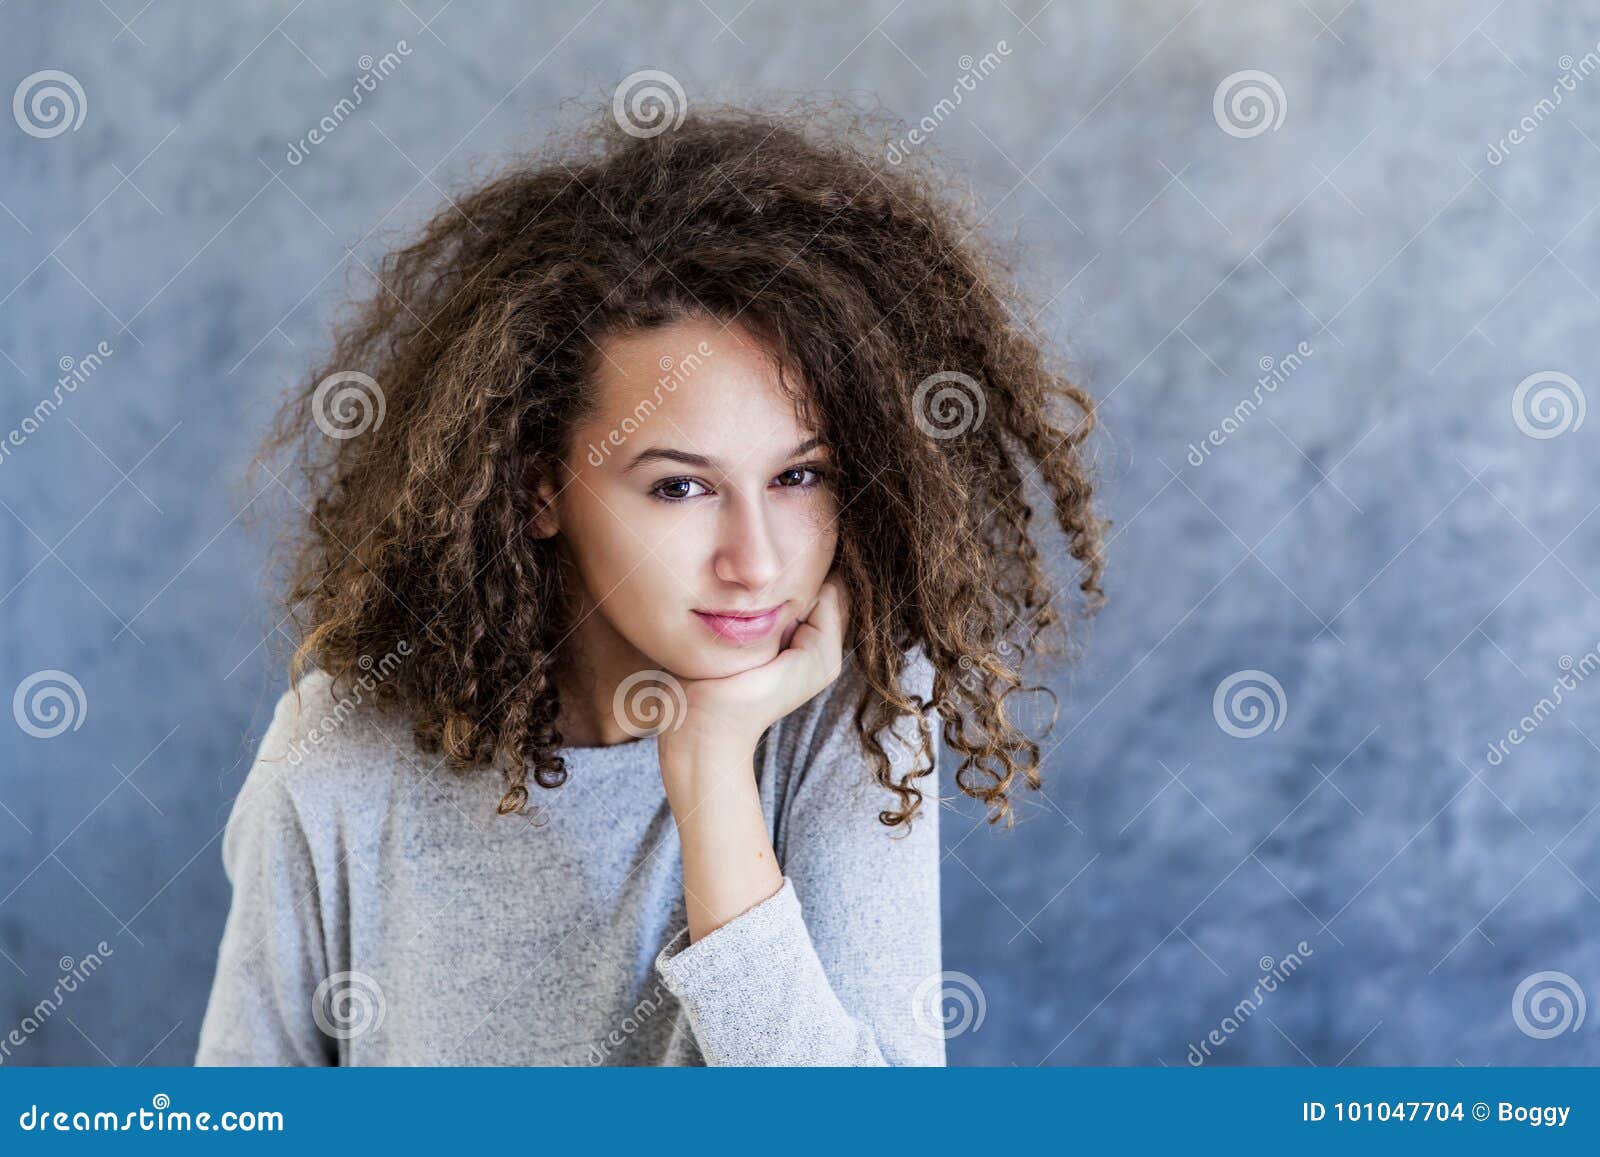 Cute Teen Girl With Curly Hair Stock Photo Image Of Closeu